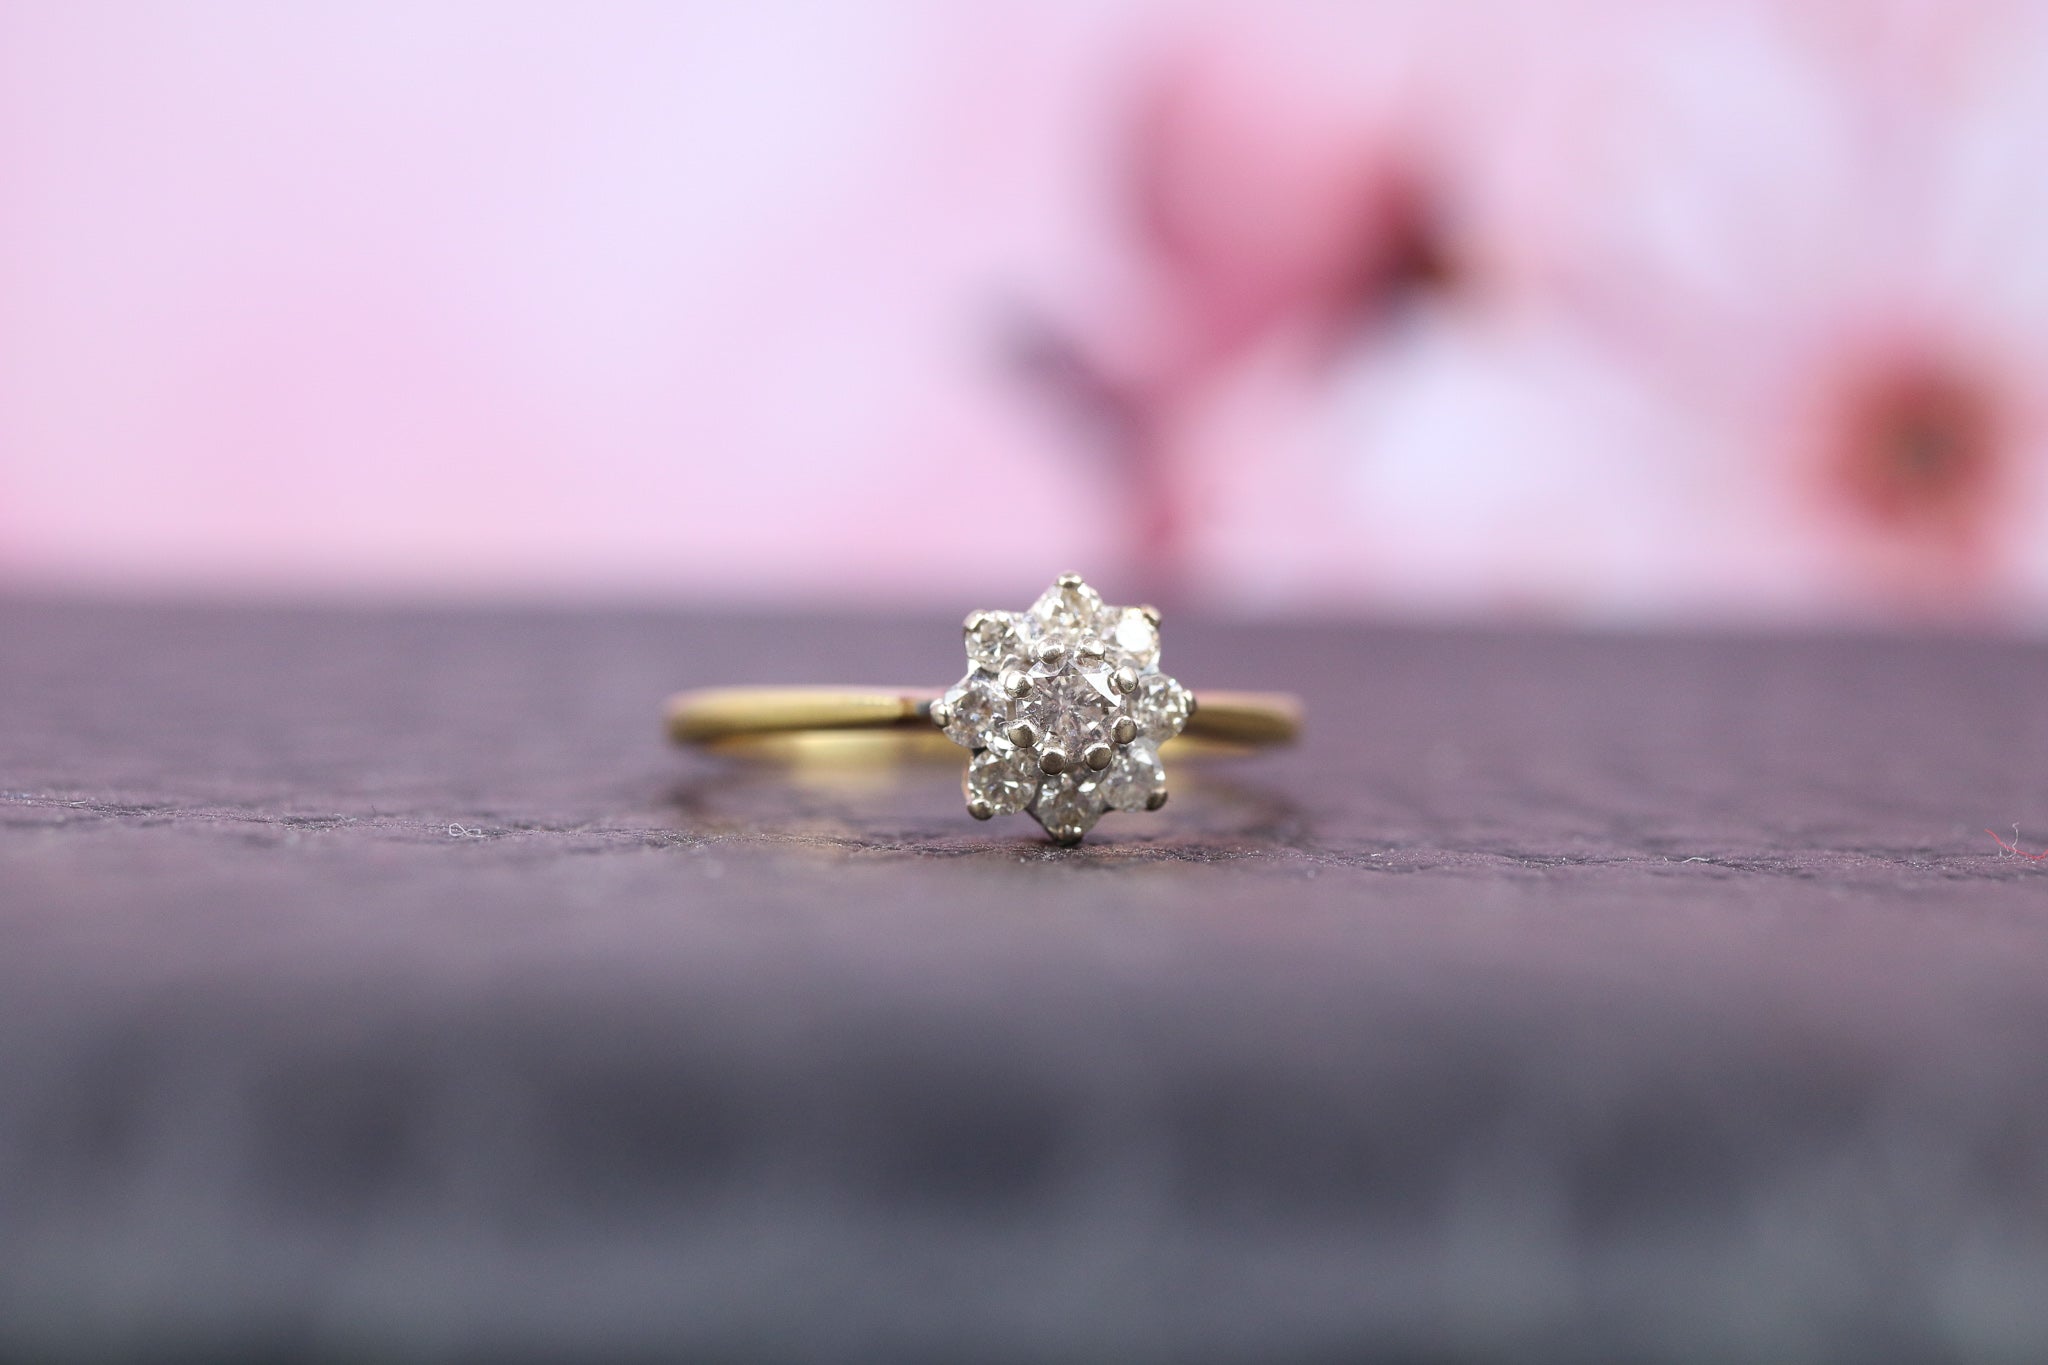 18ct Yellow Gold & Diamond Ring - W6008 - Hallmark Jewellers Formby & The Jewellers Bench Widnes